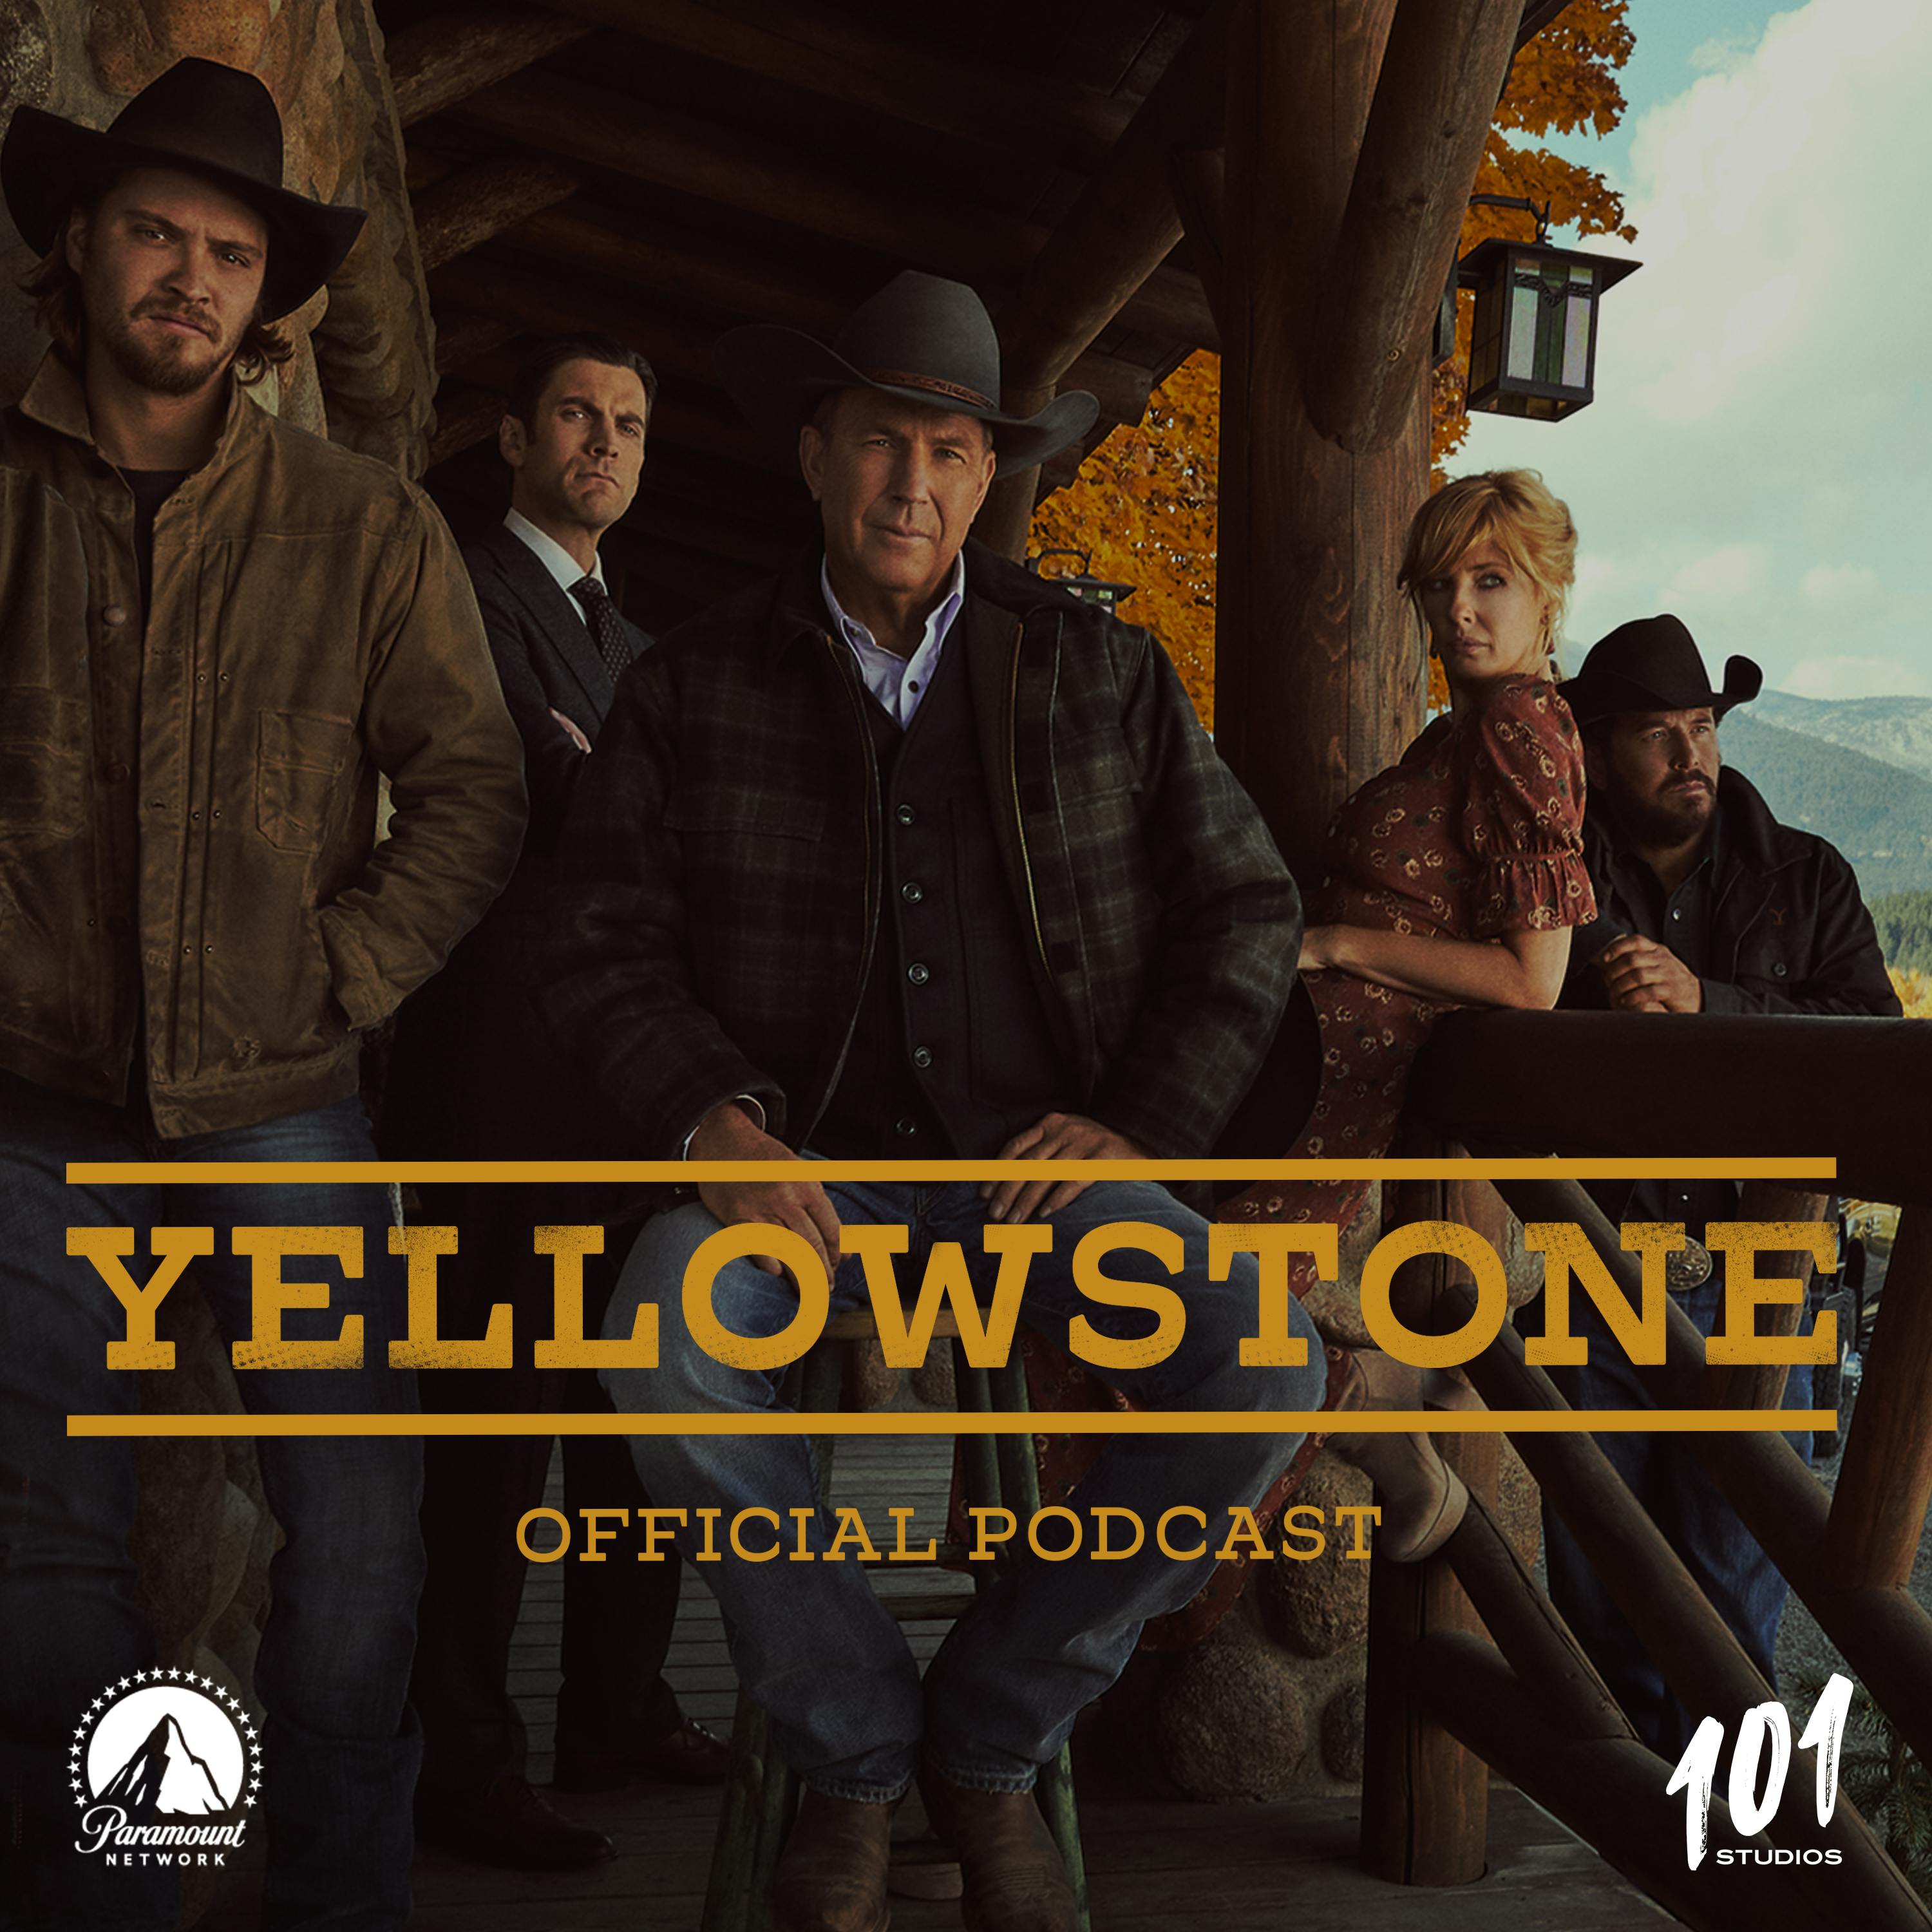 Who Is Buster Welch From Yellowstone?